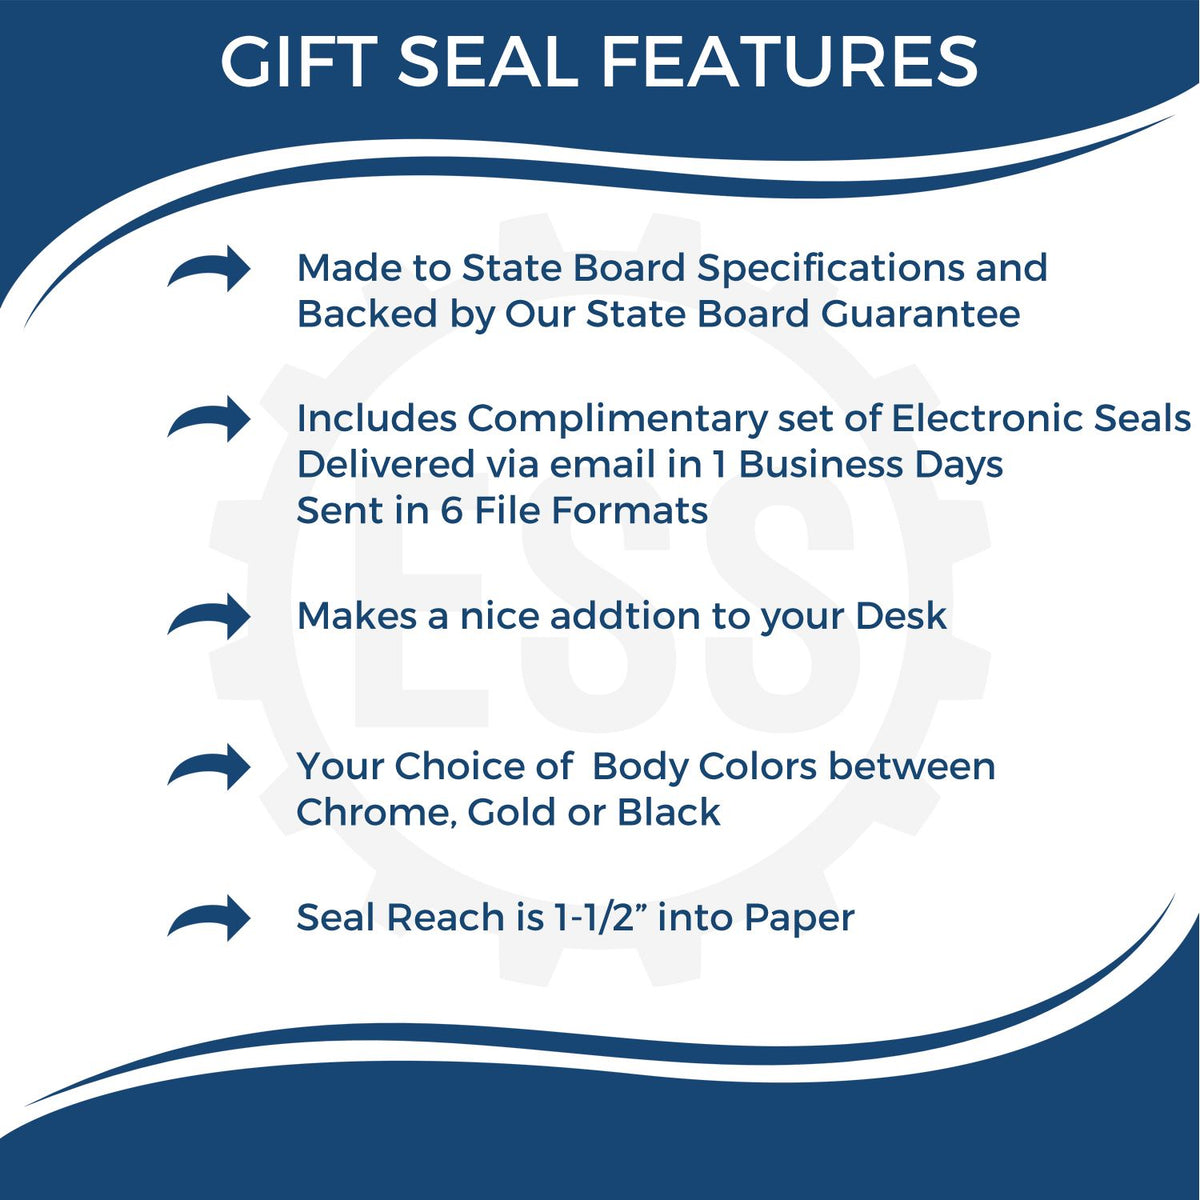 A picture of an infographic highlighting the selling points for the Gift Texas Engineer Seal